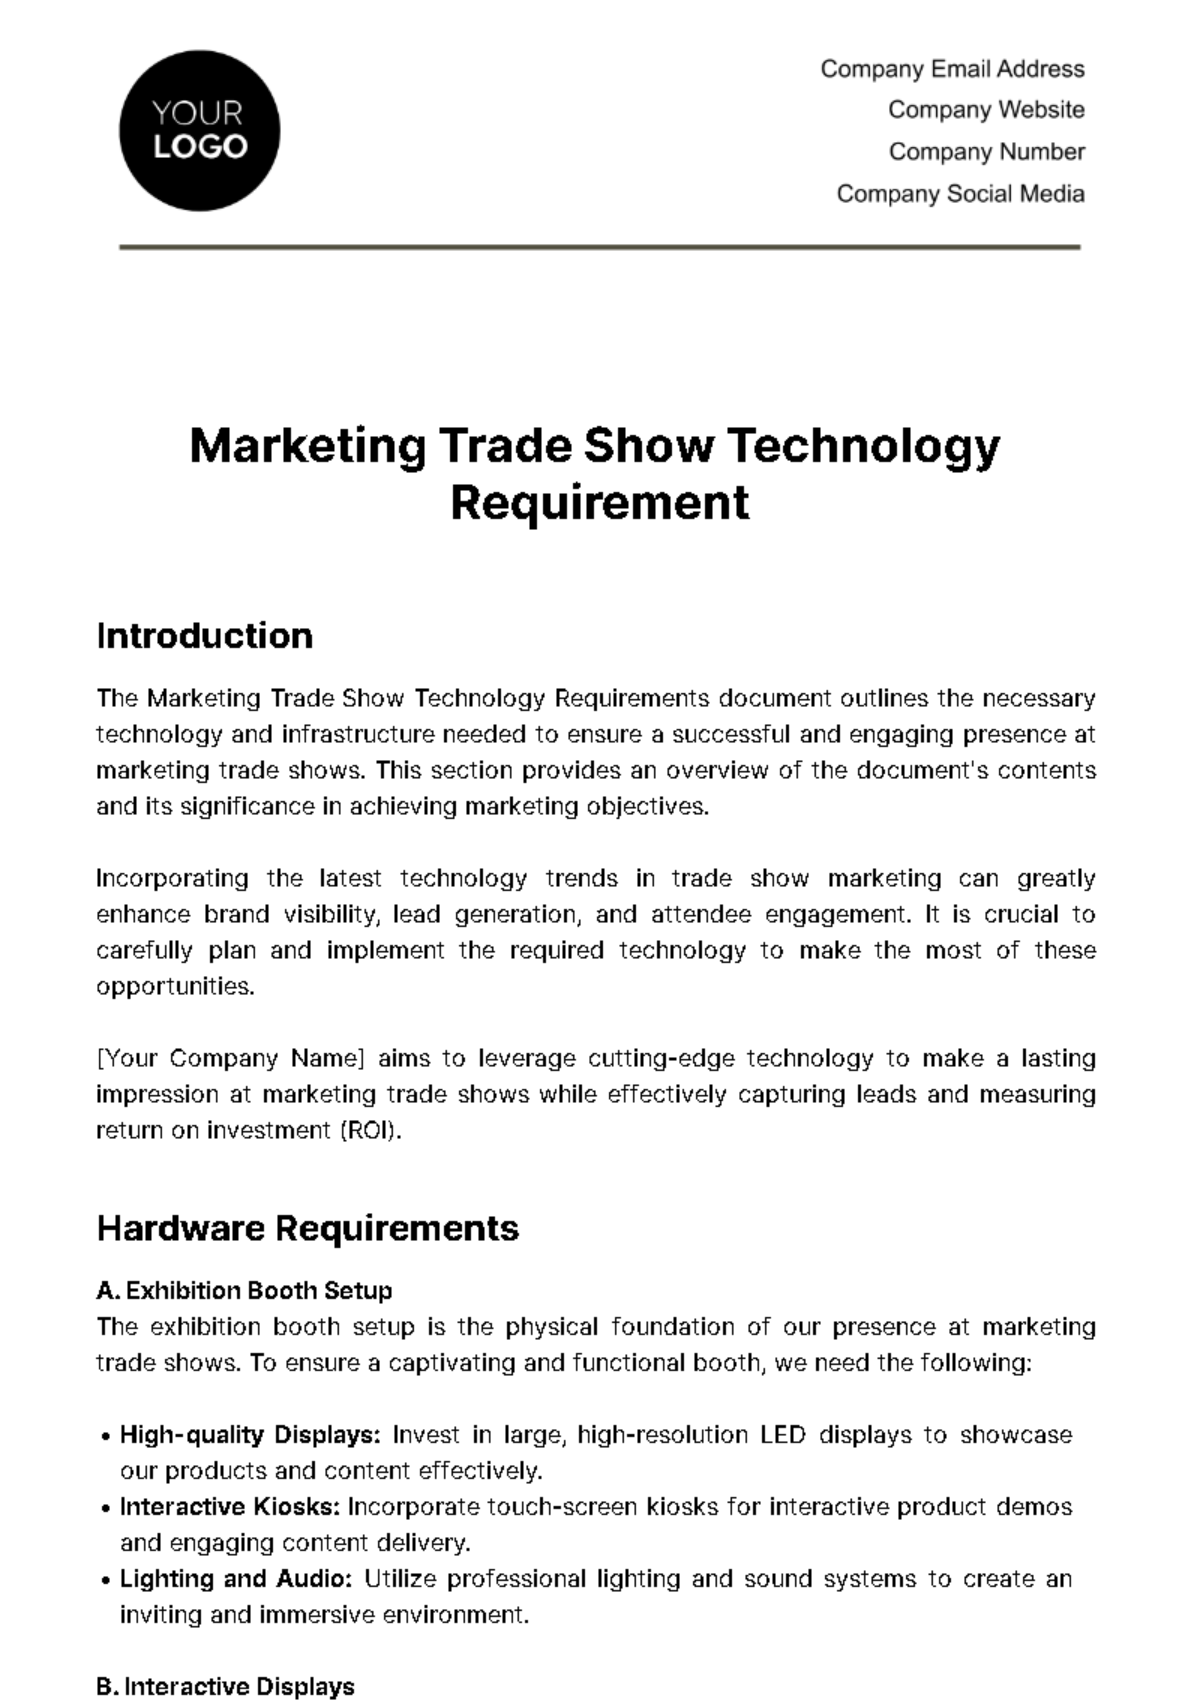 Free Marketing Trade Show Technology Requirements Template